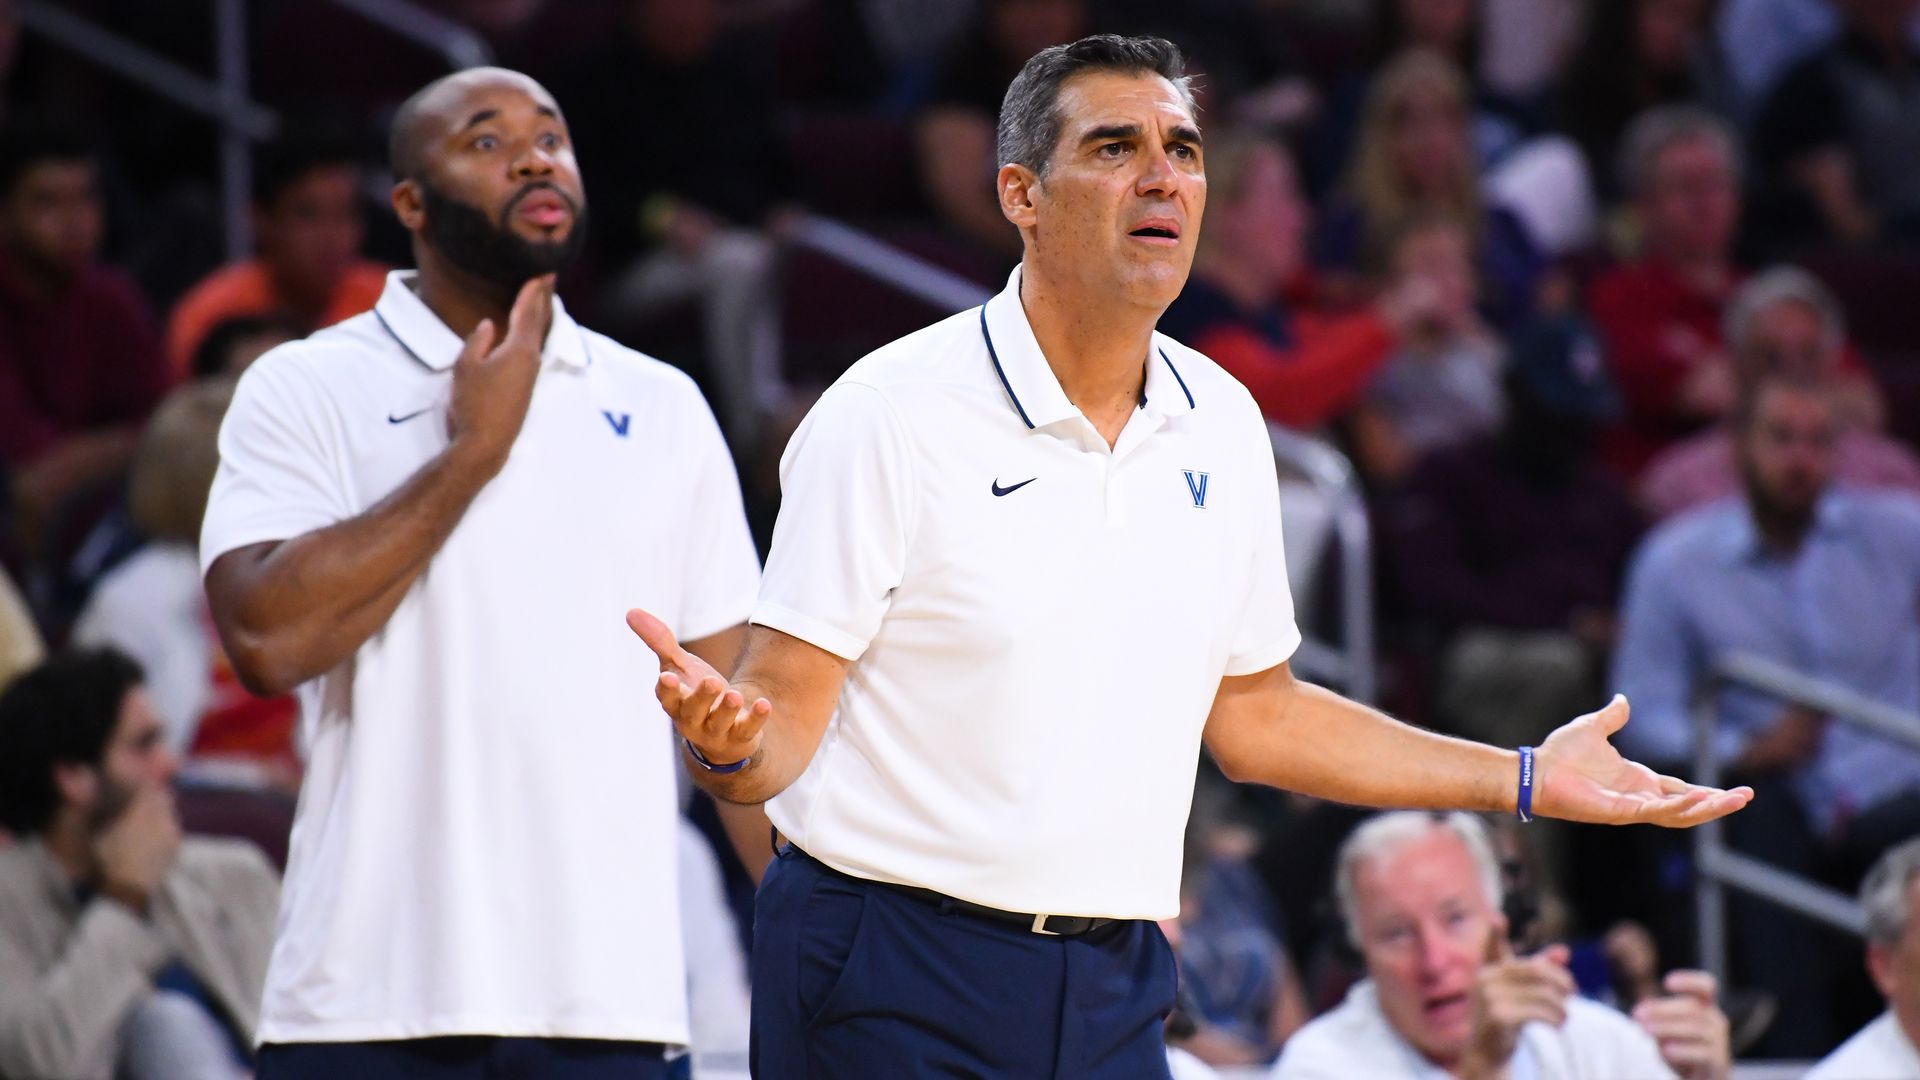 Jay Wright in a collared shirt